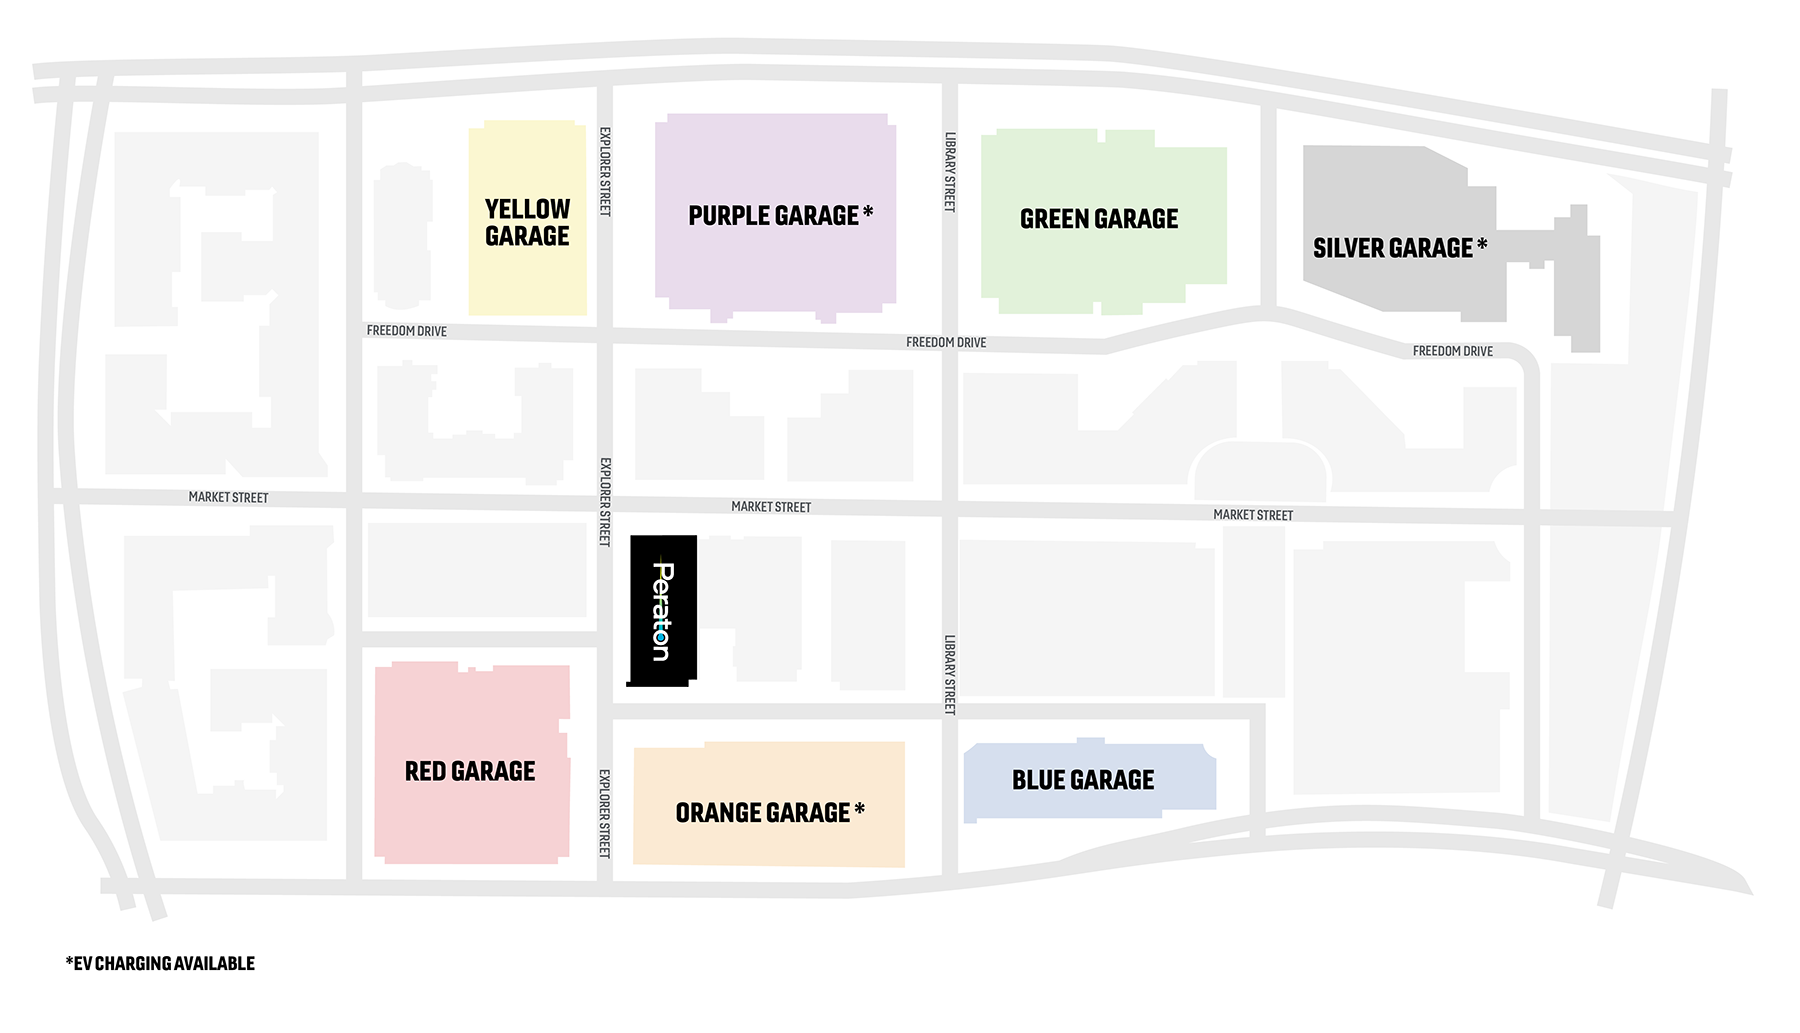 View RTC Parking Map